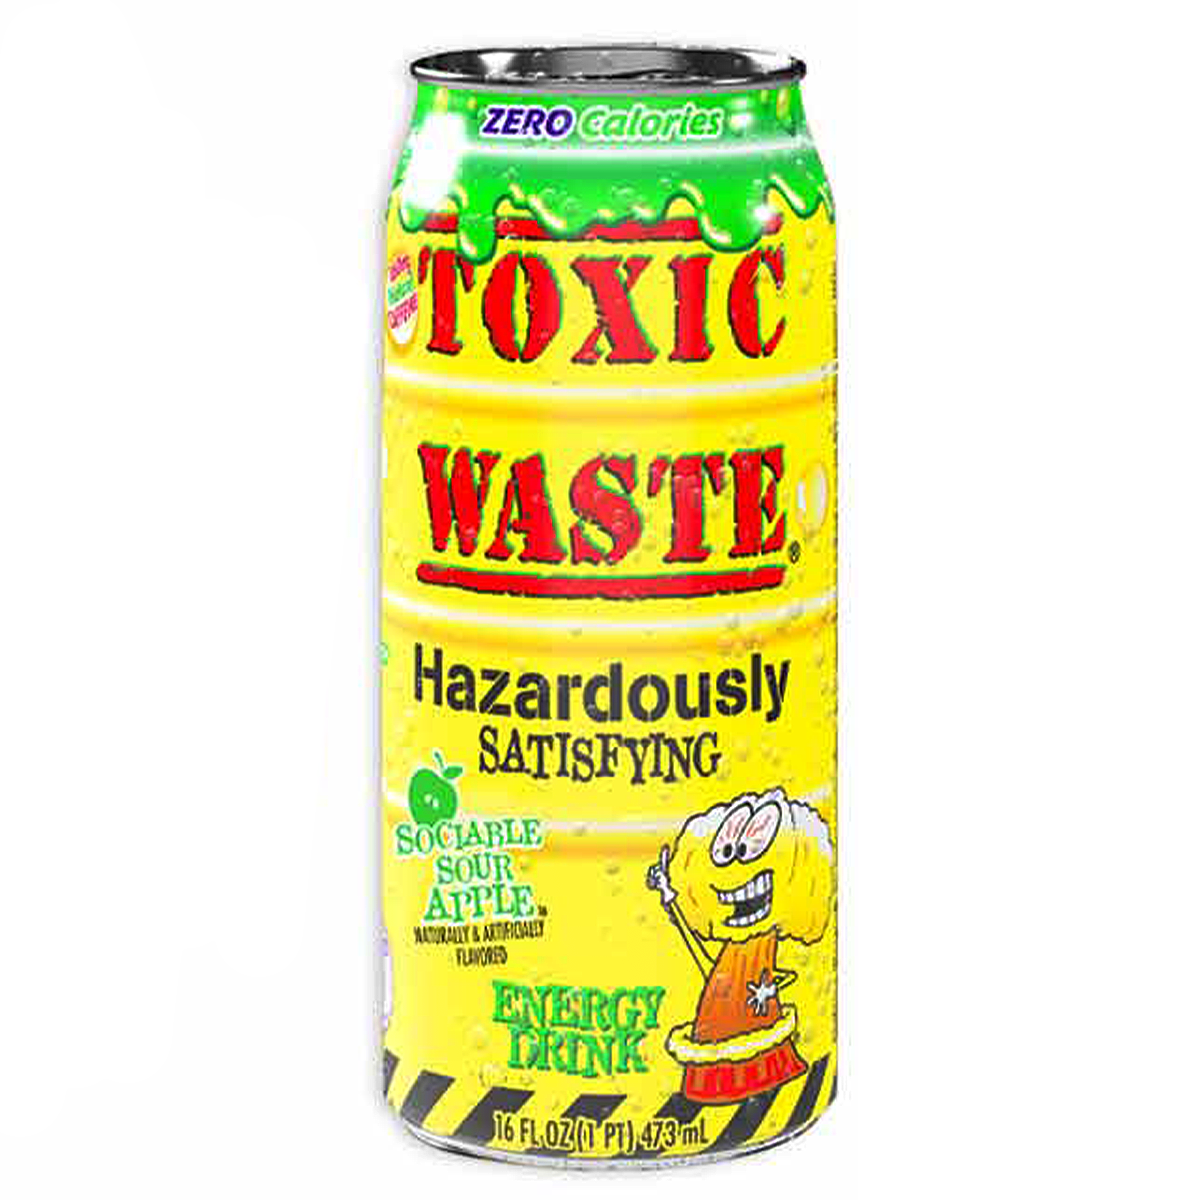 TOXIC WASTE® Sociable Sour Apple Energy Drink